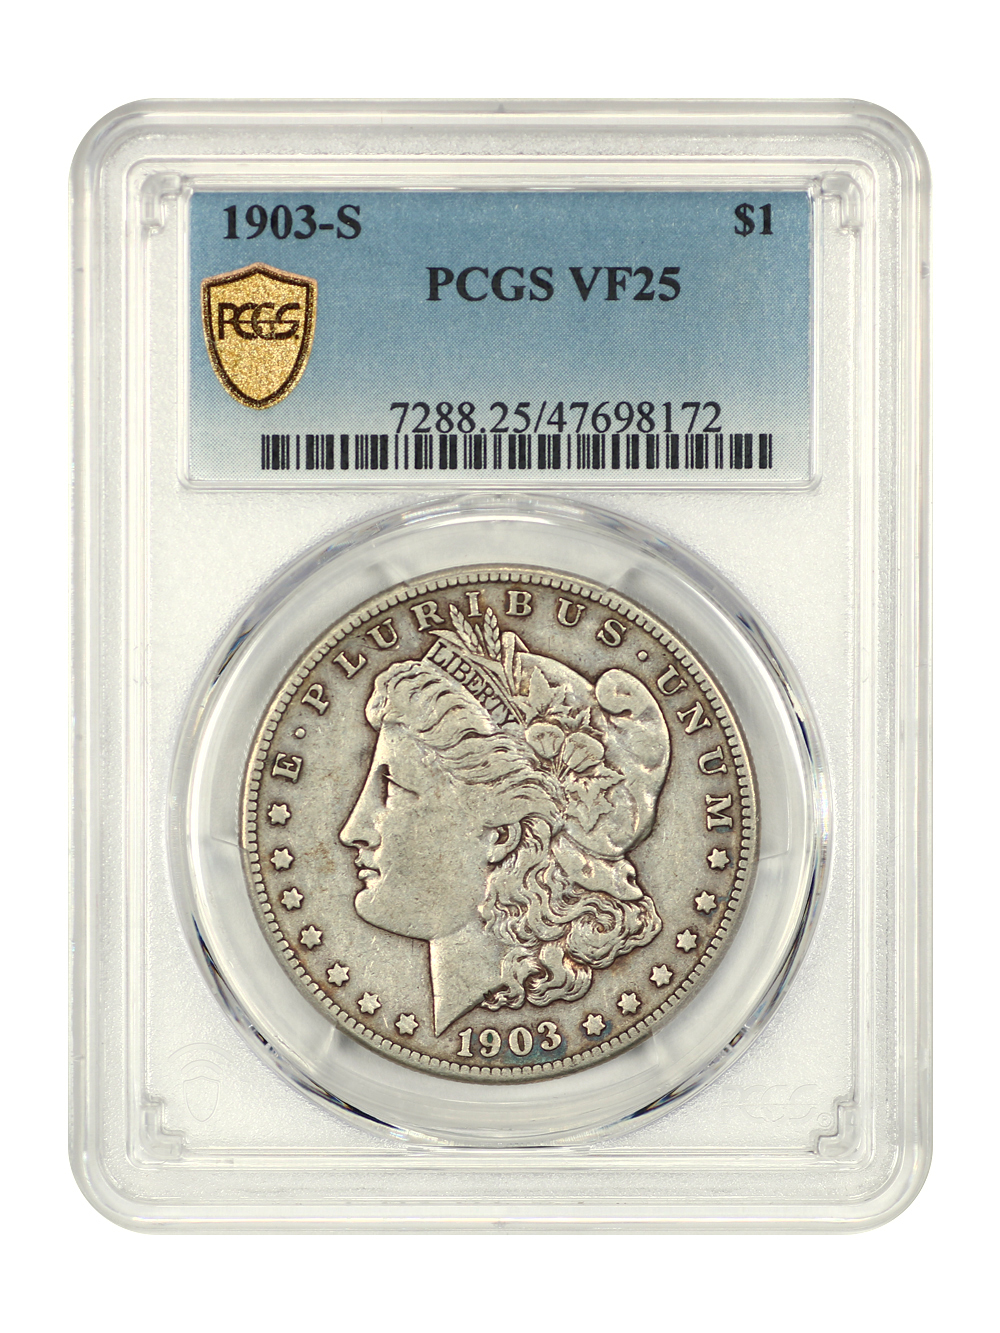 Primary image for 1903-S $1 PCGS VF25